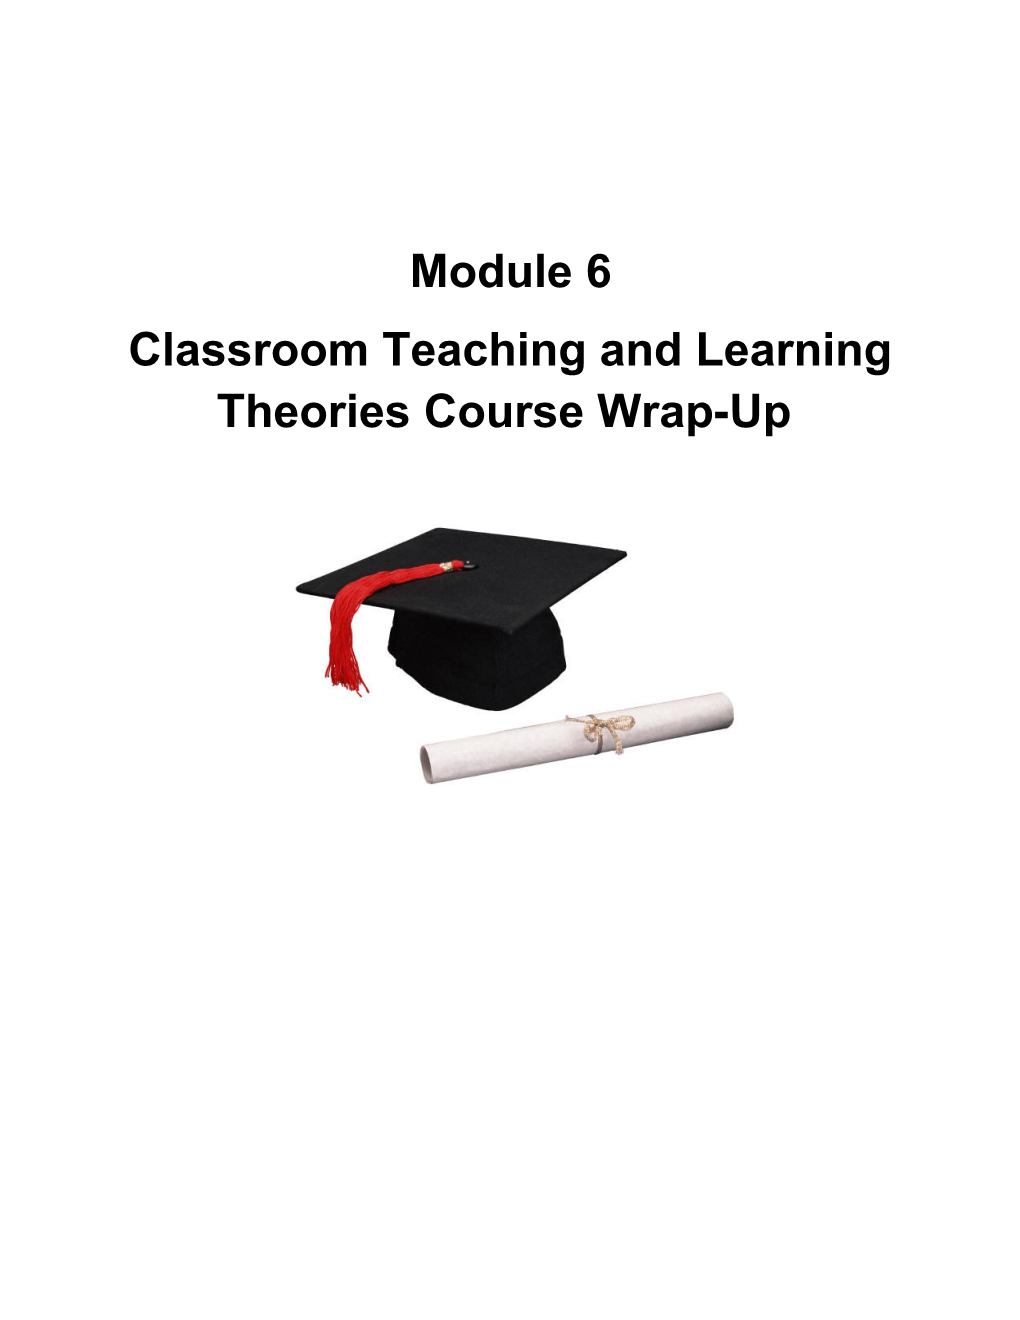 Classroom Teaching and Learning Theories Course Wrap-Up